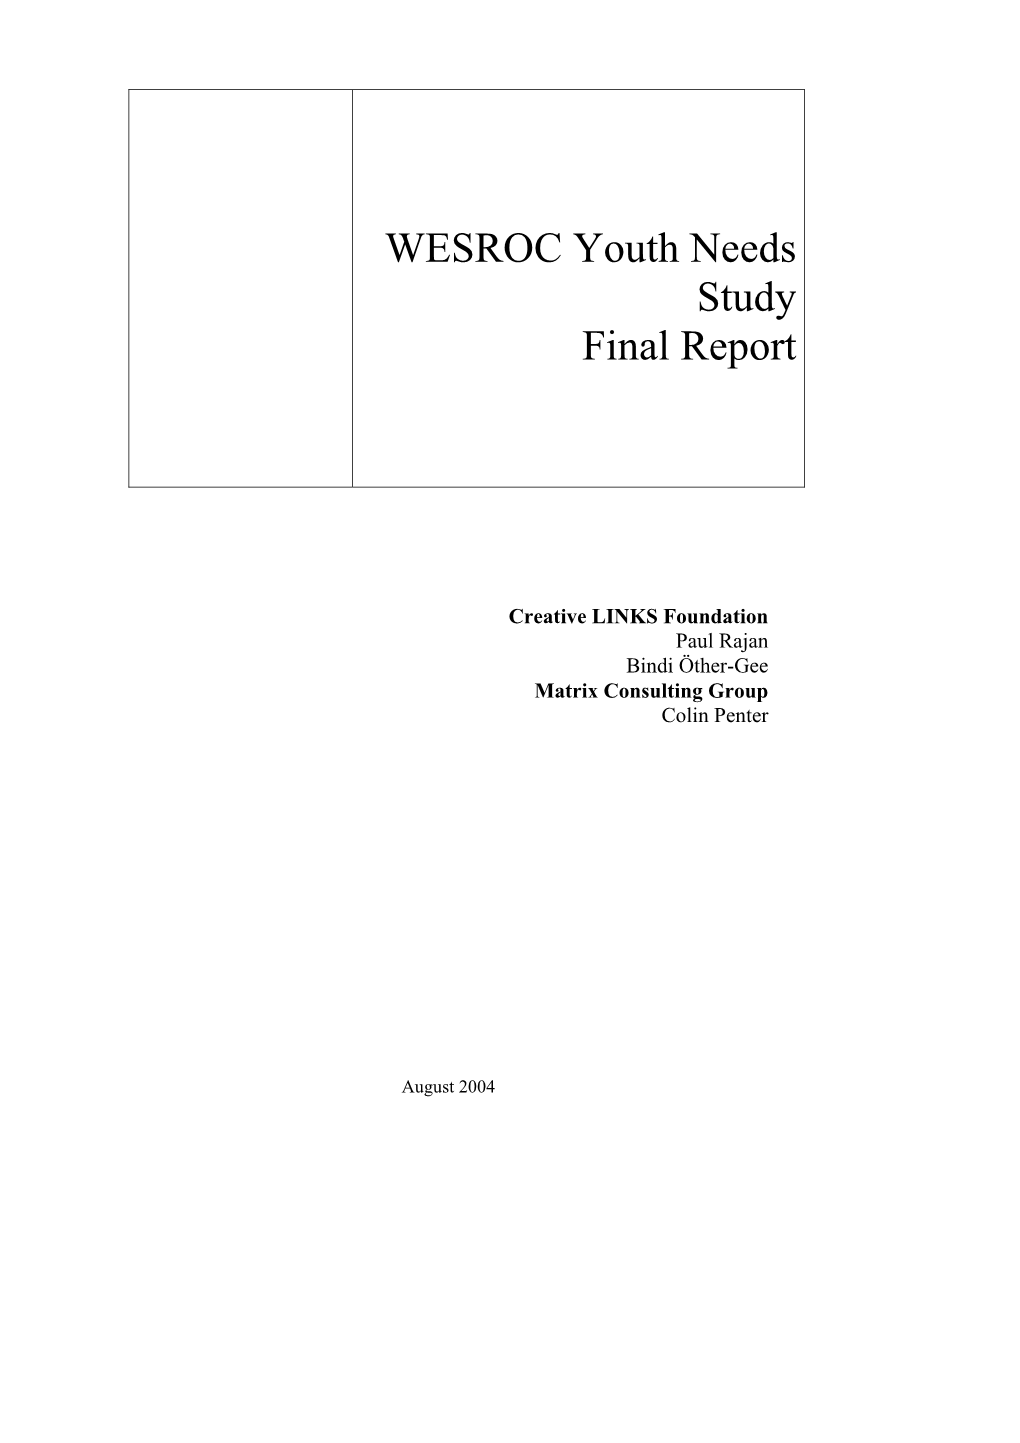 WESROC Youth Needs Study Final Report